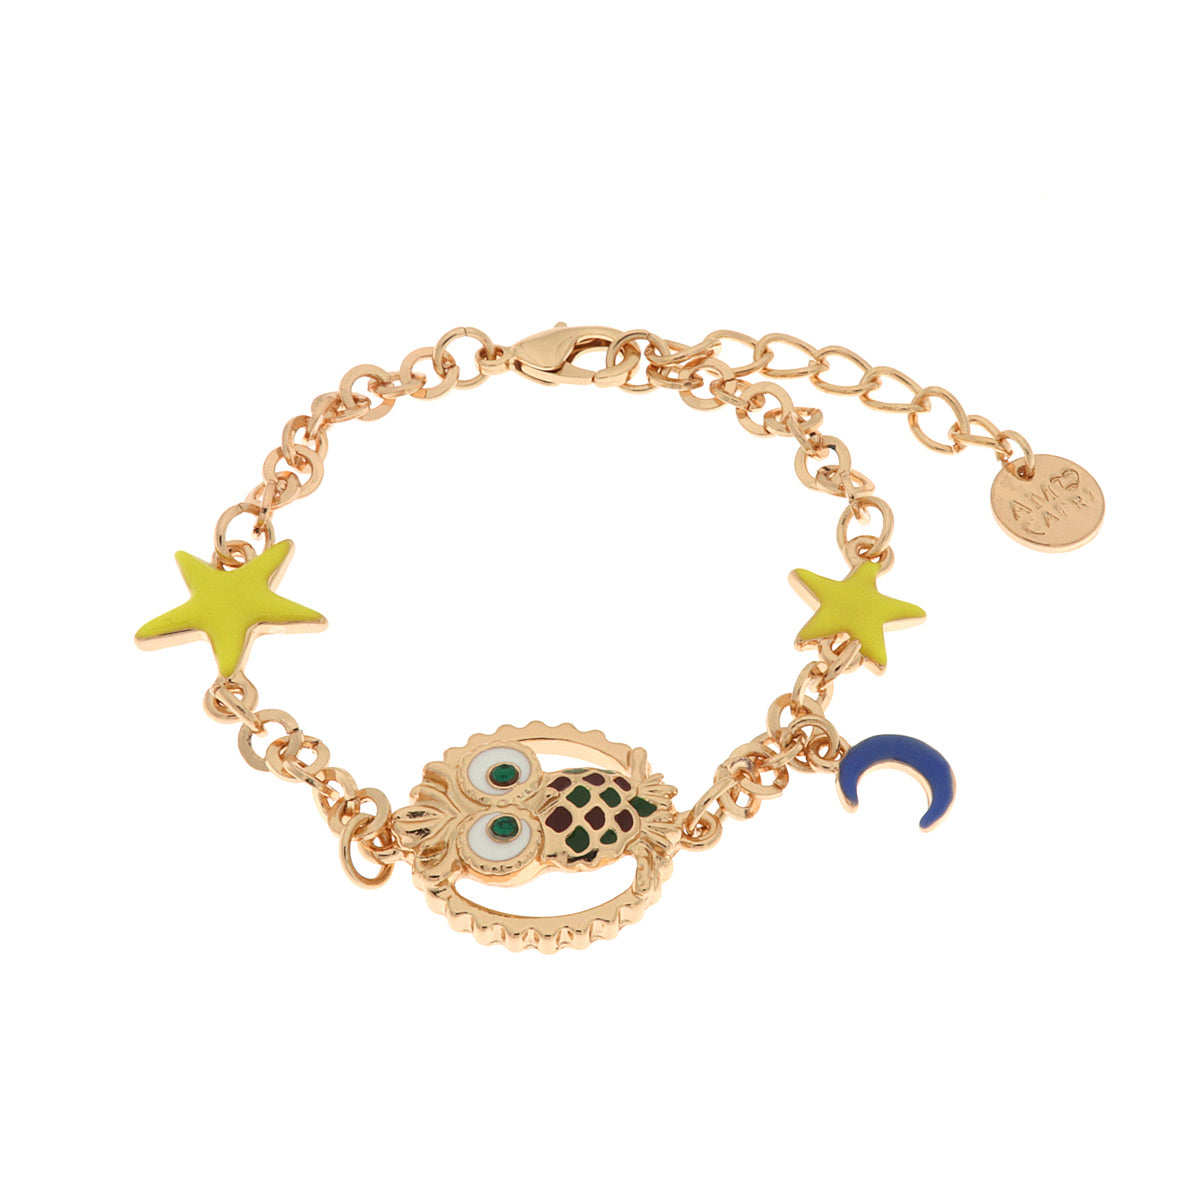 Metal bracelet with lucky owl, moon and stars